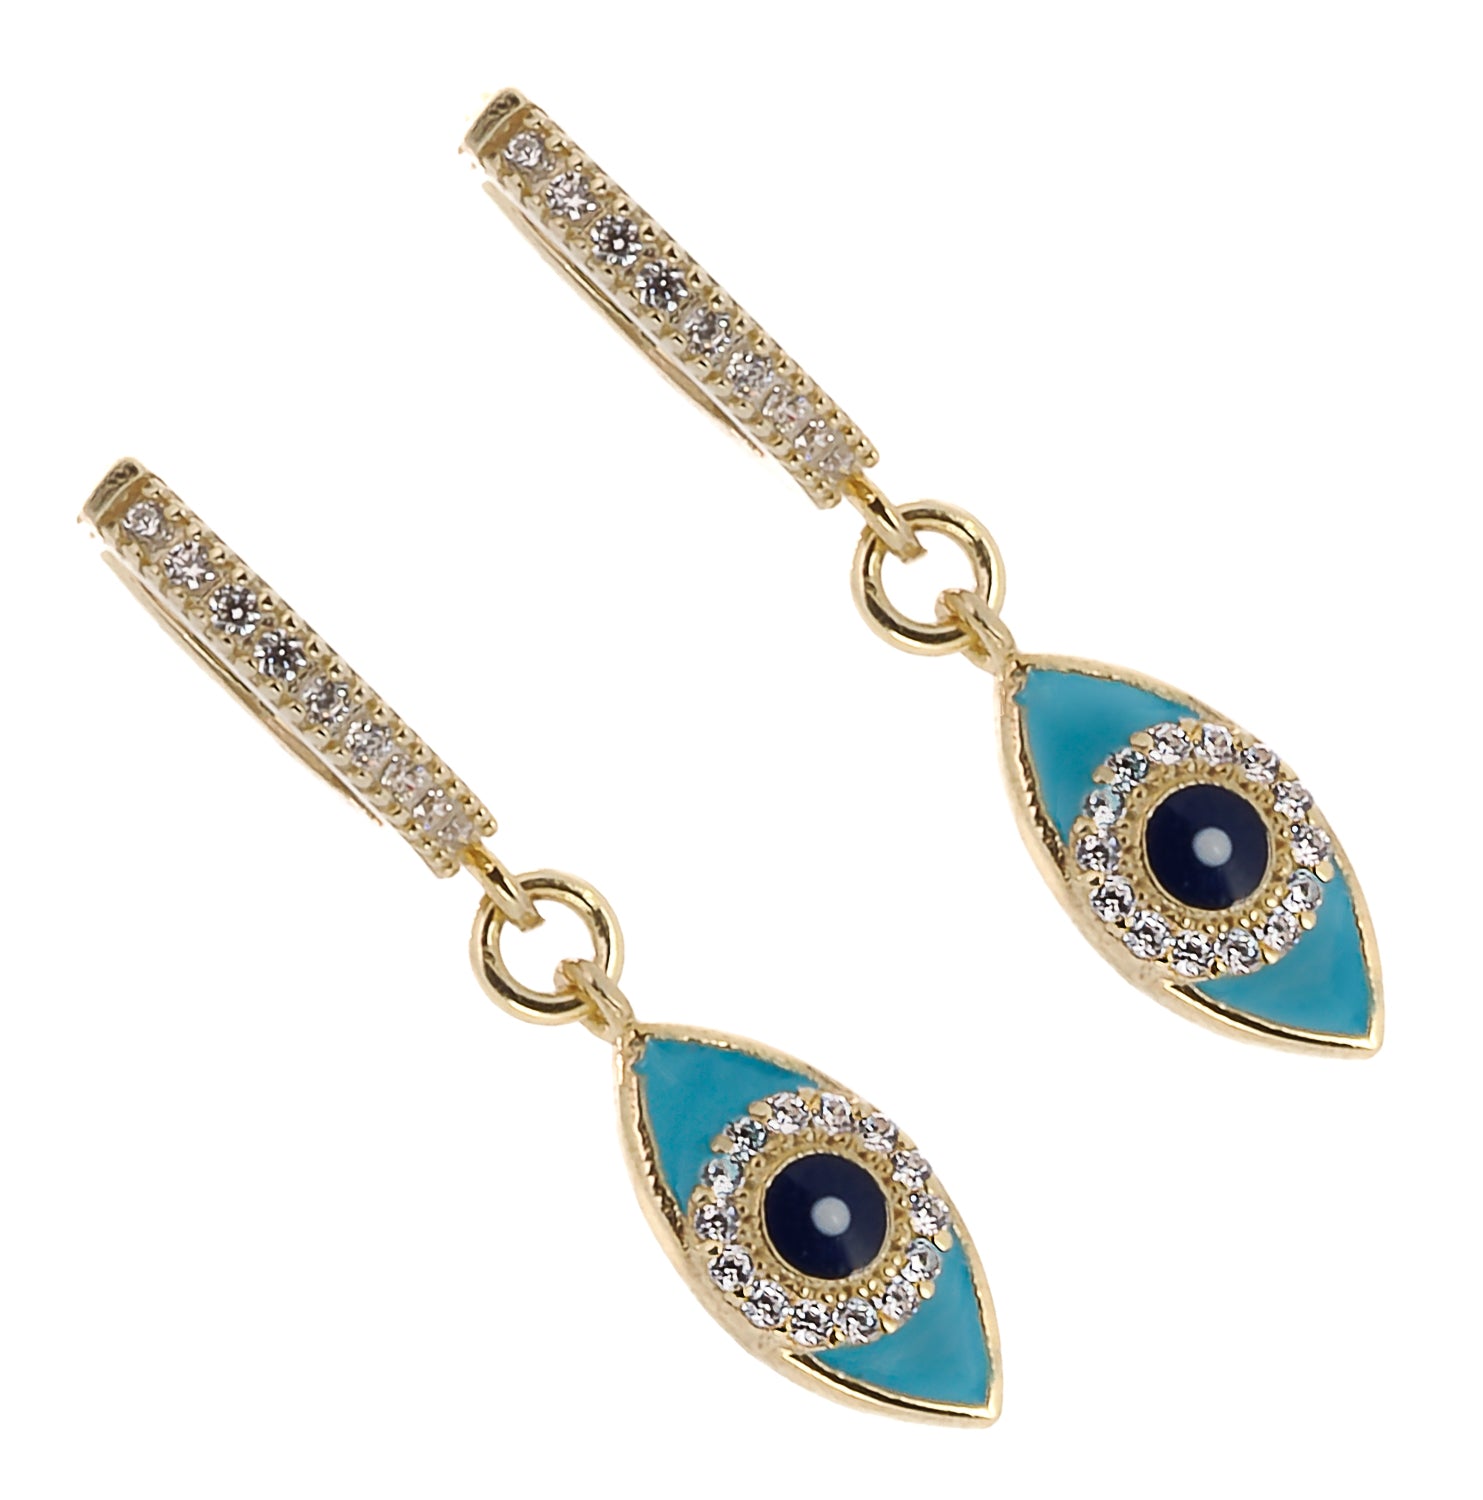 Dainty and elegant gold earrings adorned with turquoise enamel and shimmering zircon stones